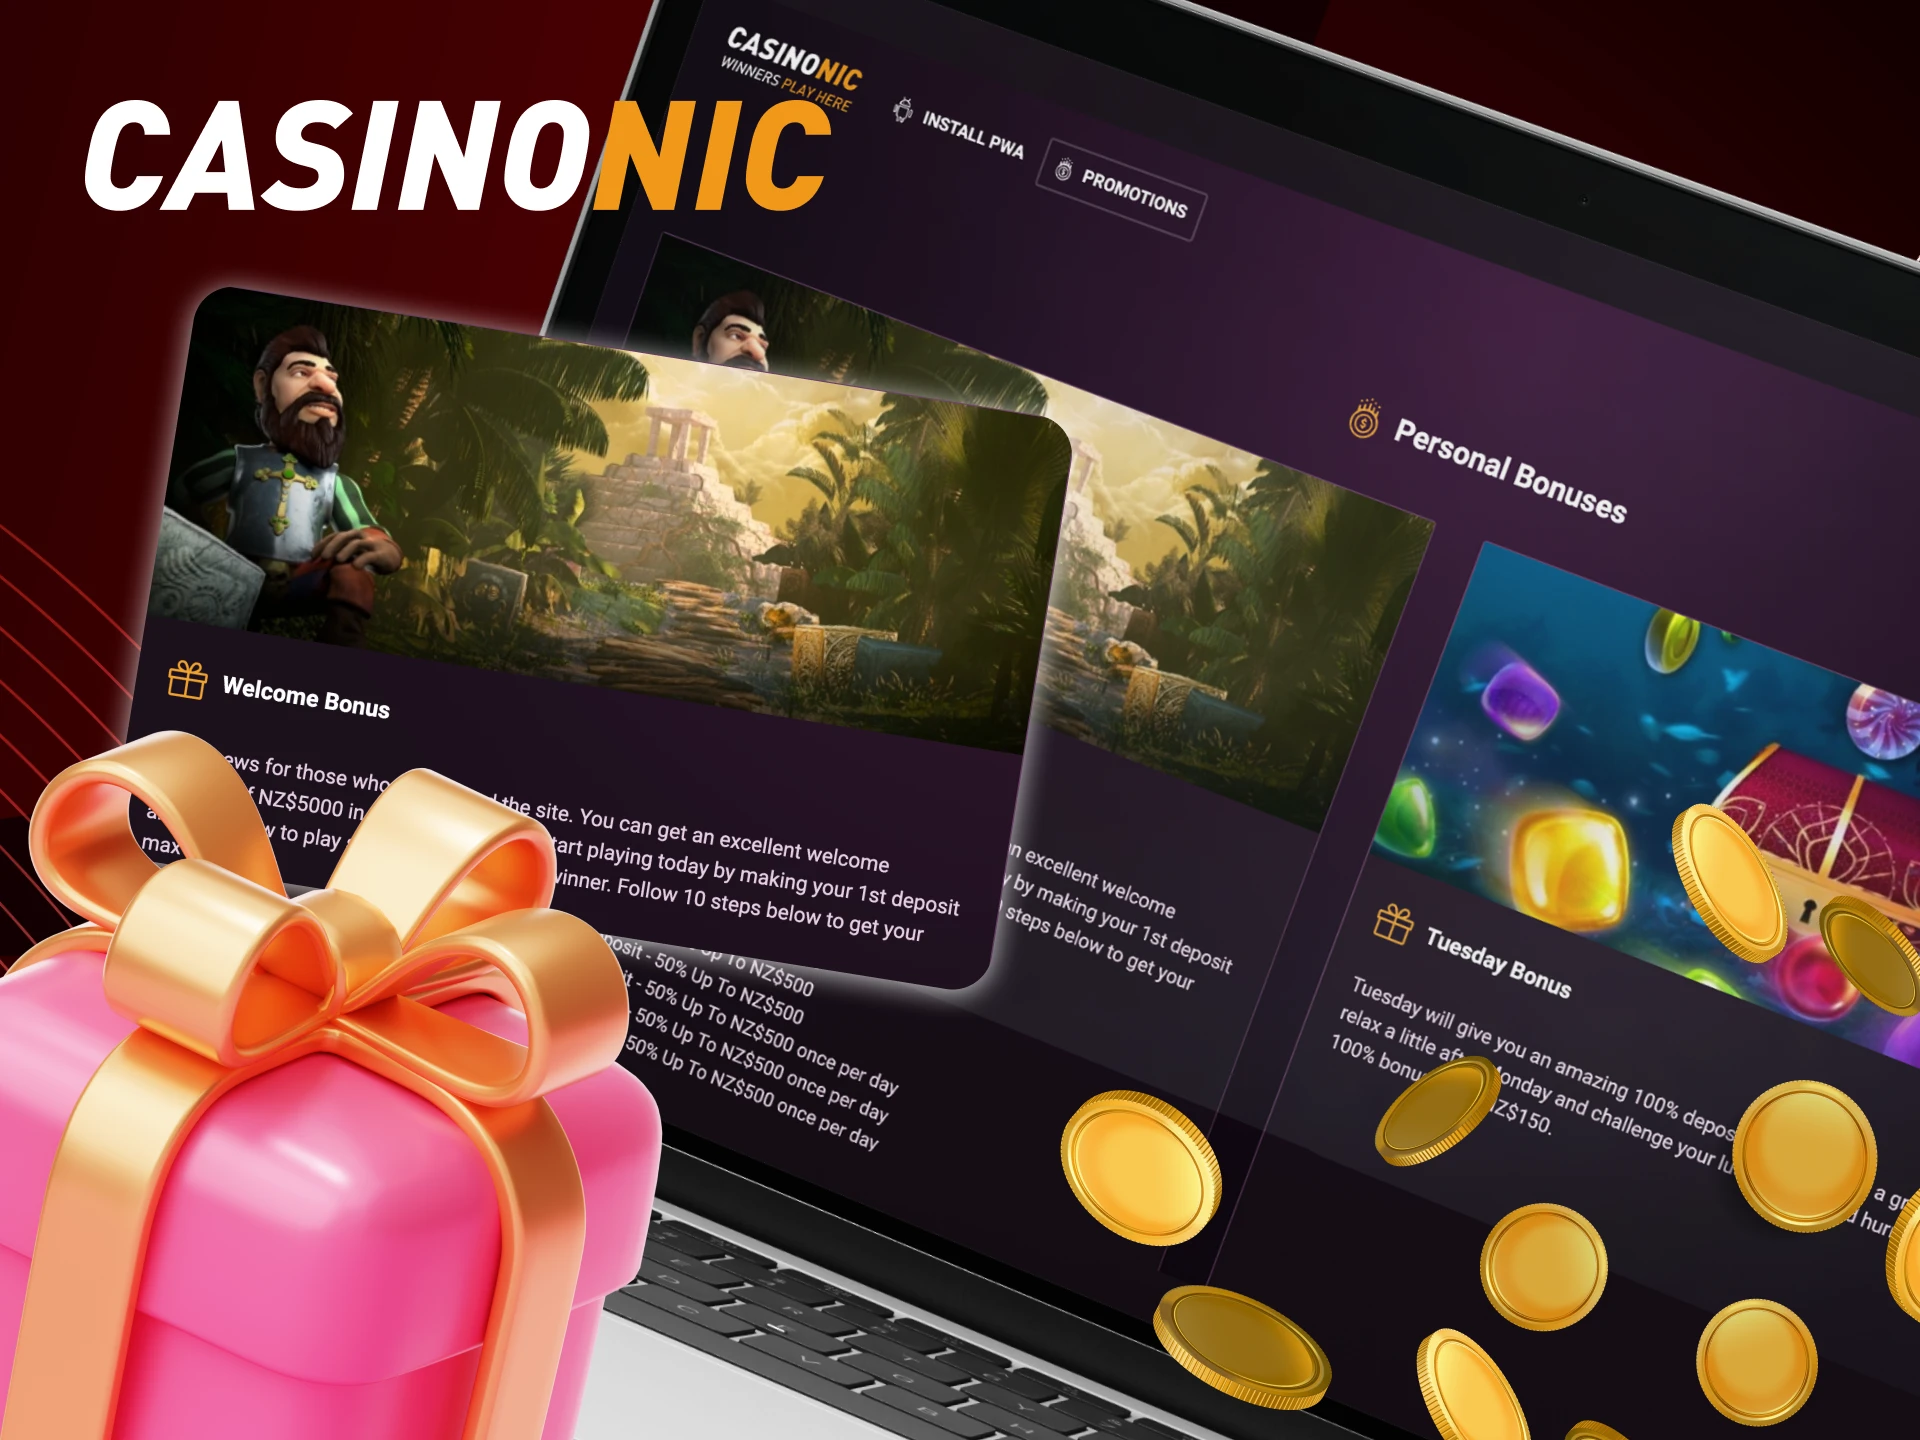 What bonuses are there for players in the online casino CasinoNic.